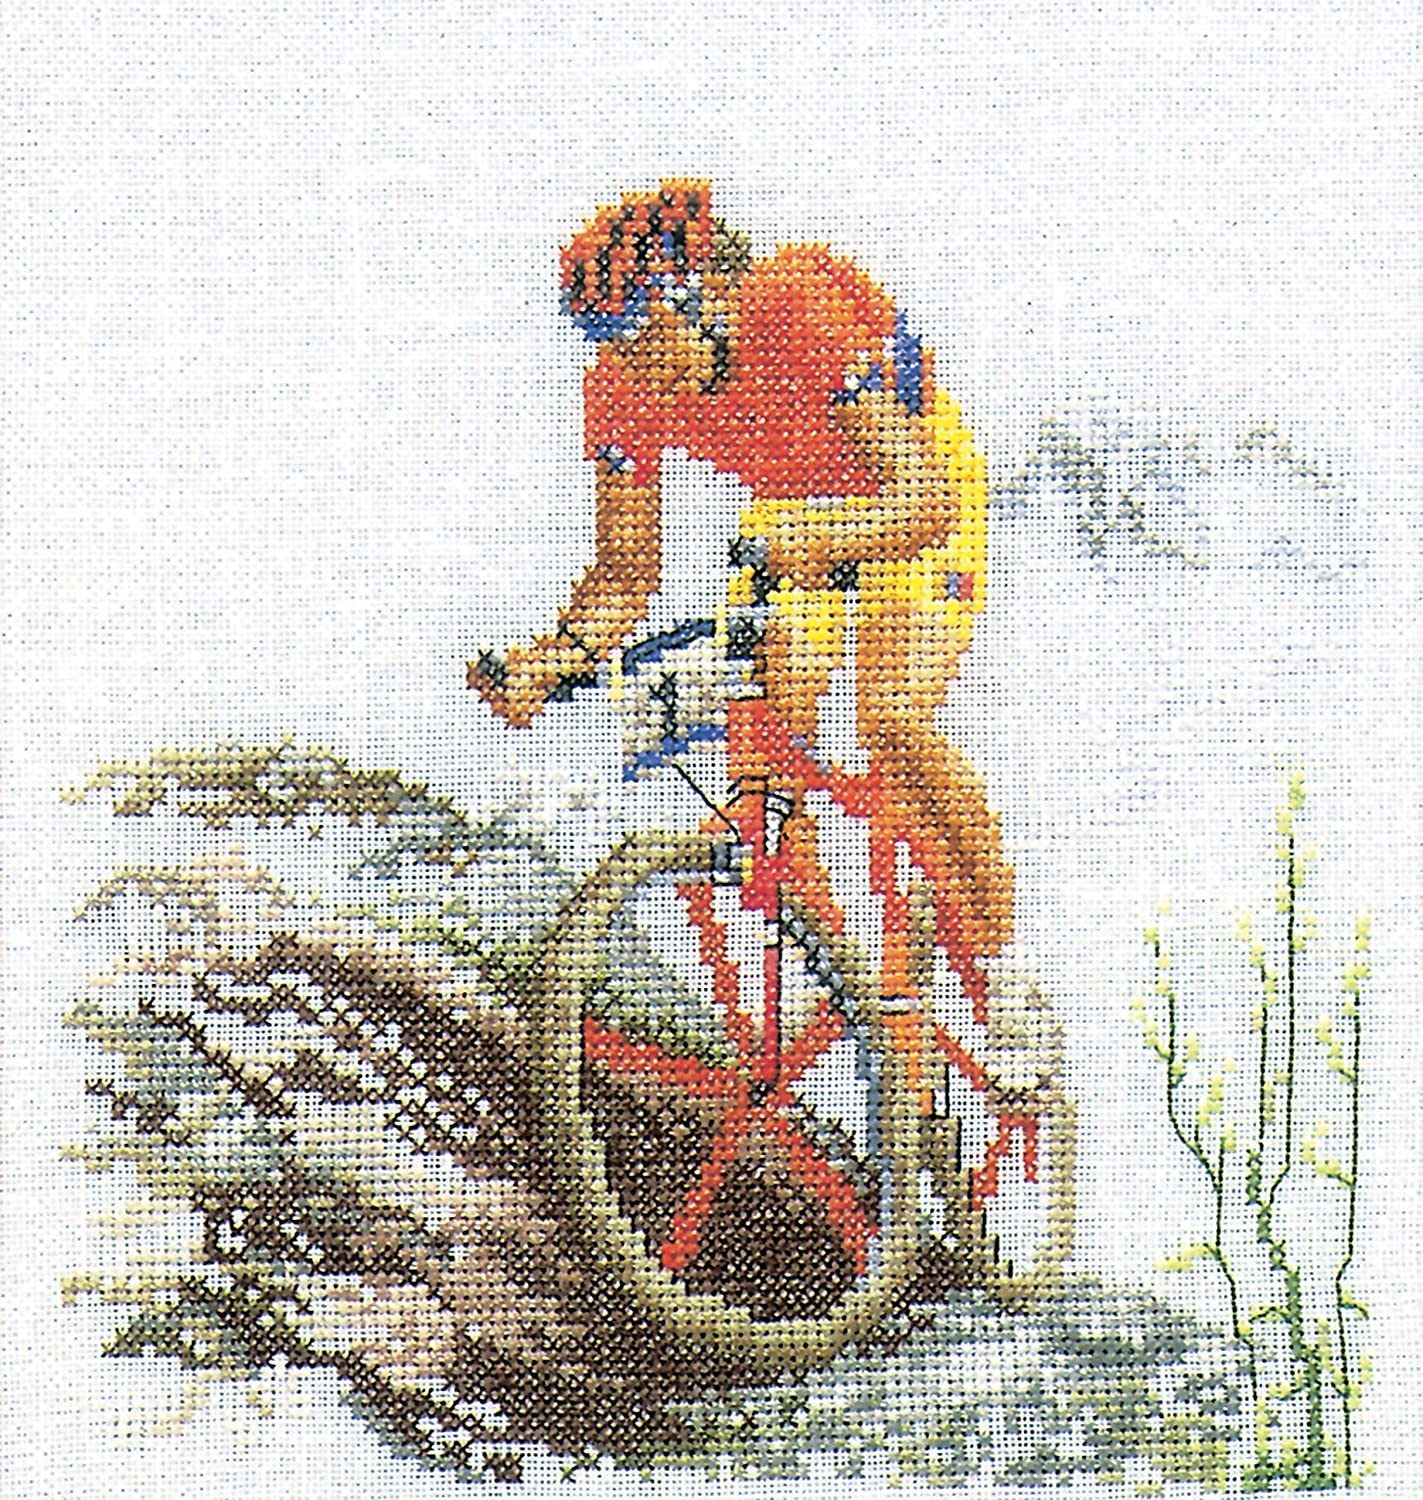 Thea Gouverneur Cross Stitch Kit - Mountain Bike 3035. Counted cross stitch kit from the fabulous Thea Gouverneur in The Netherlands. This kit is available on either Aida or linen.